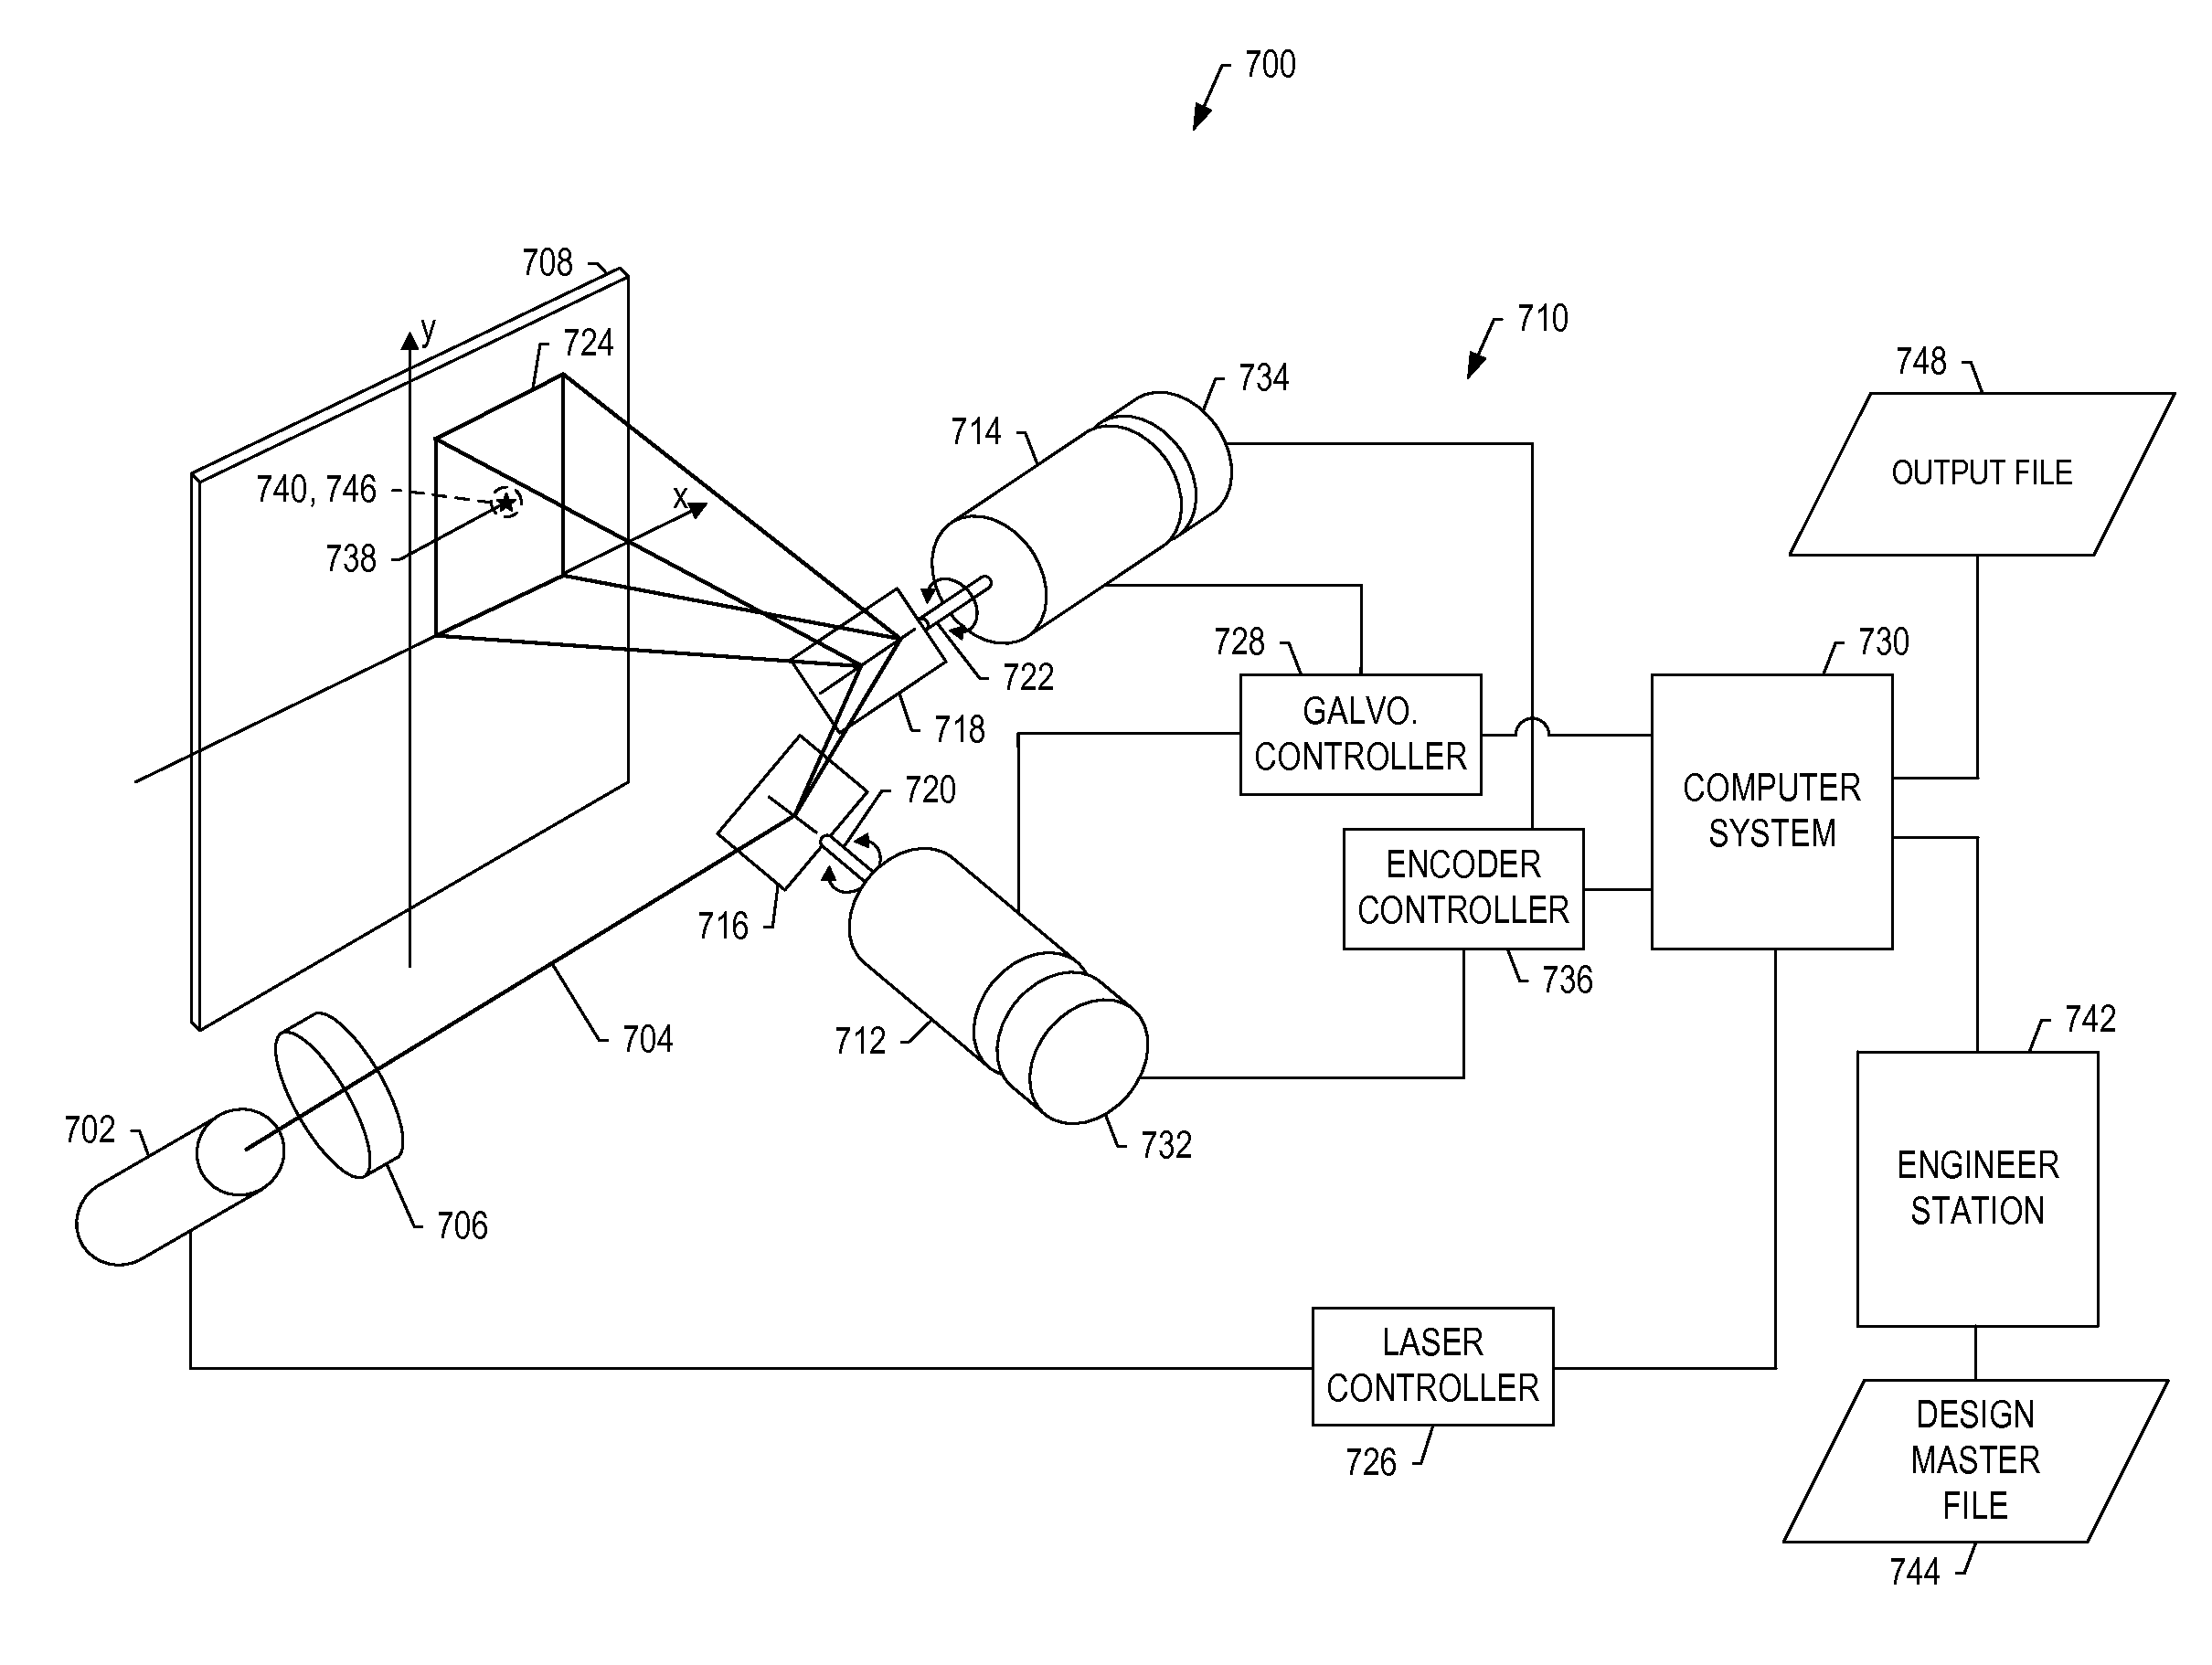 Apparatuses and methods for accurate structure marking and marking-assisted structure locating